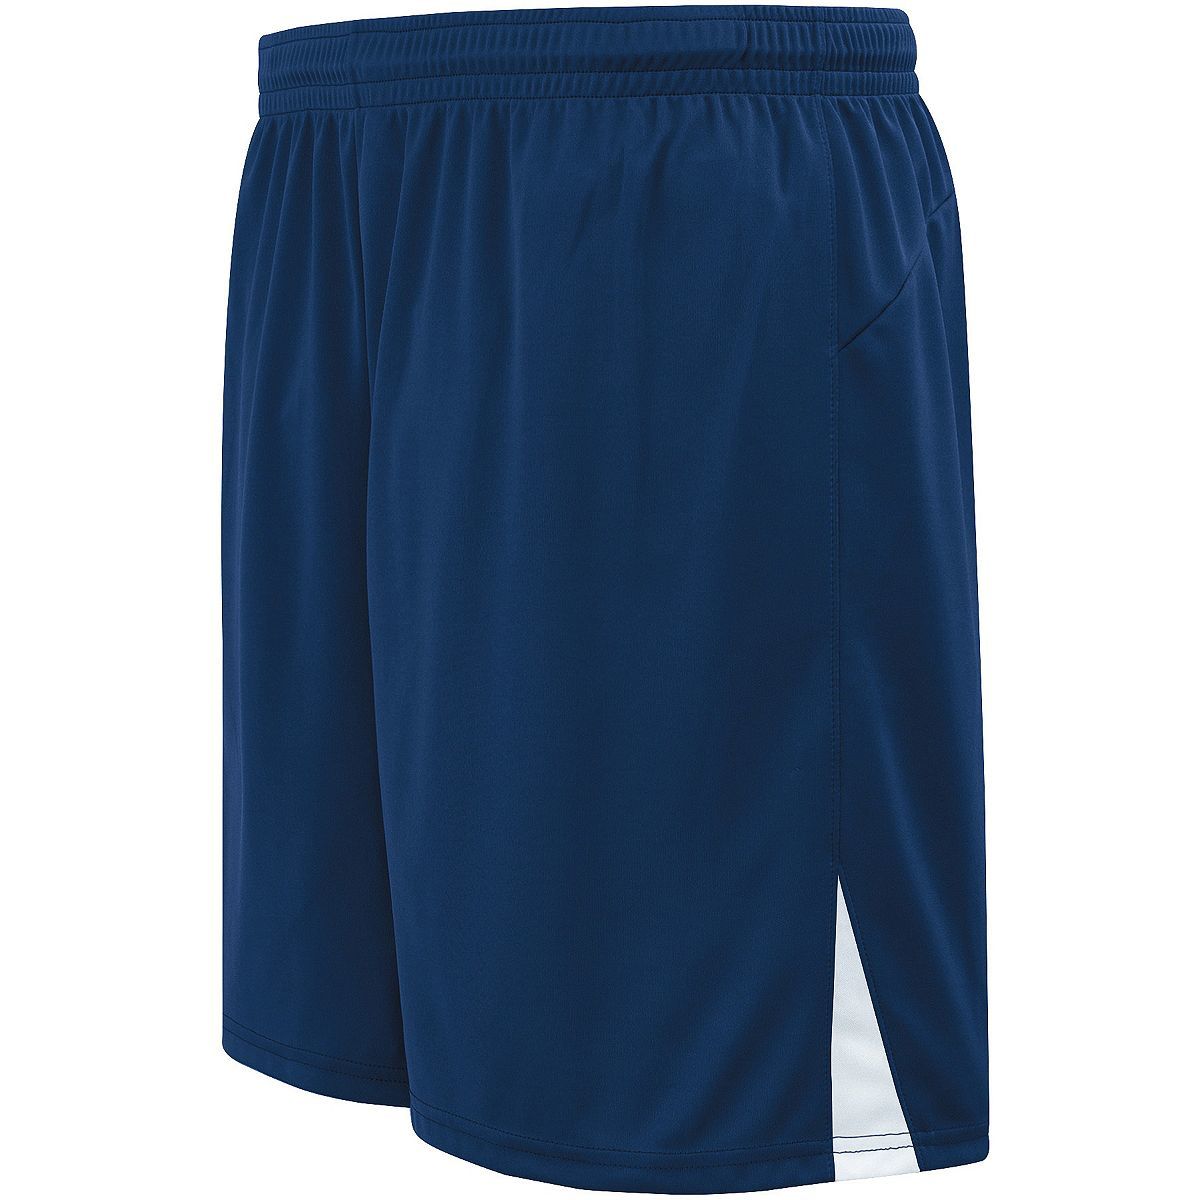 High 5 Youth Hawk Shorts in Navy/White  -Part of the Youth, Youth-Shorts, High5-Products, Soccer, All-Sports-1 product lines at KanaleyCreations.com